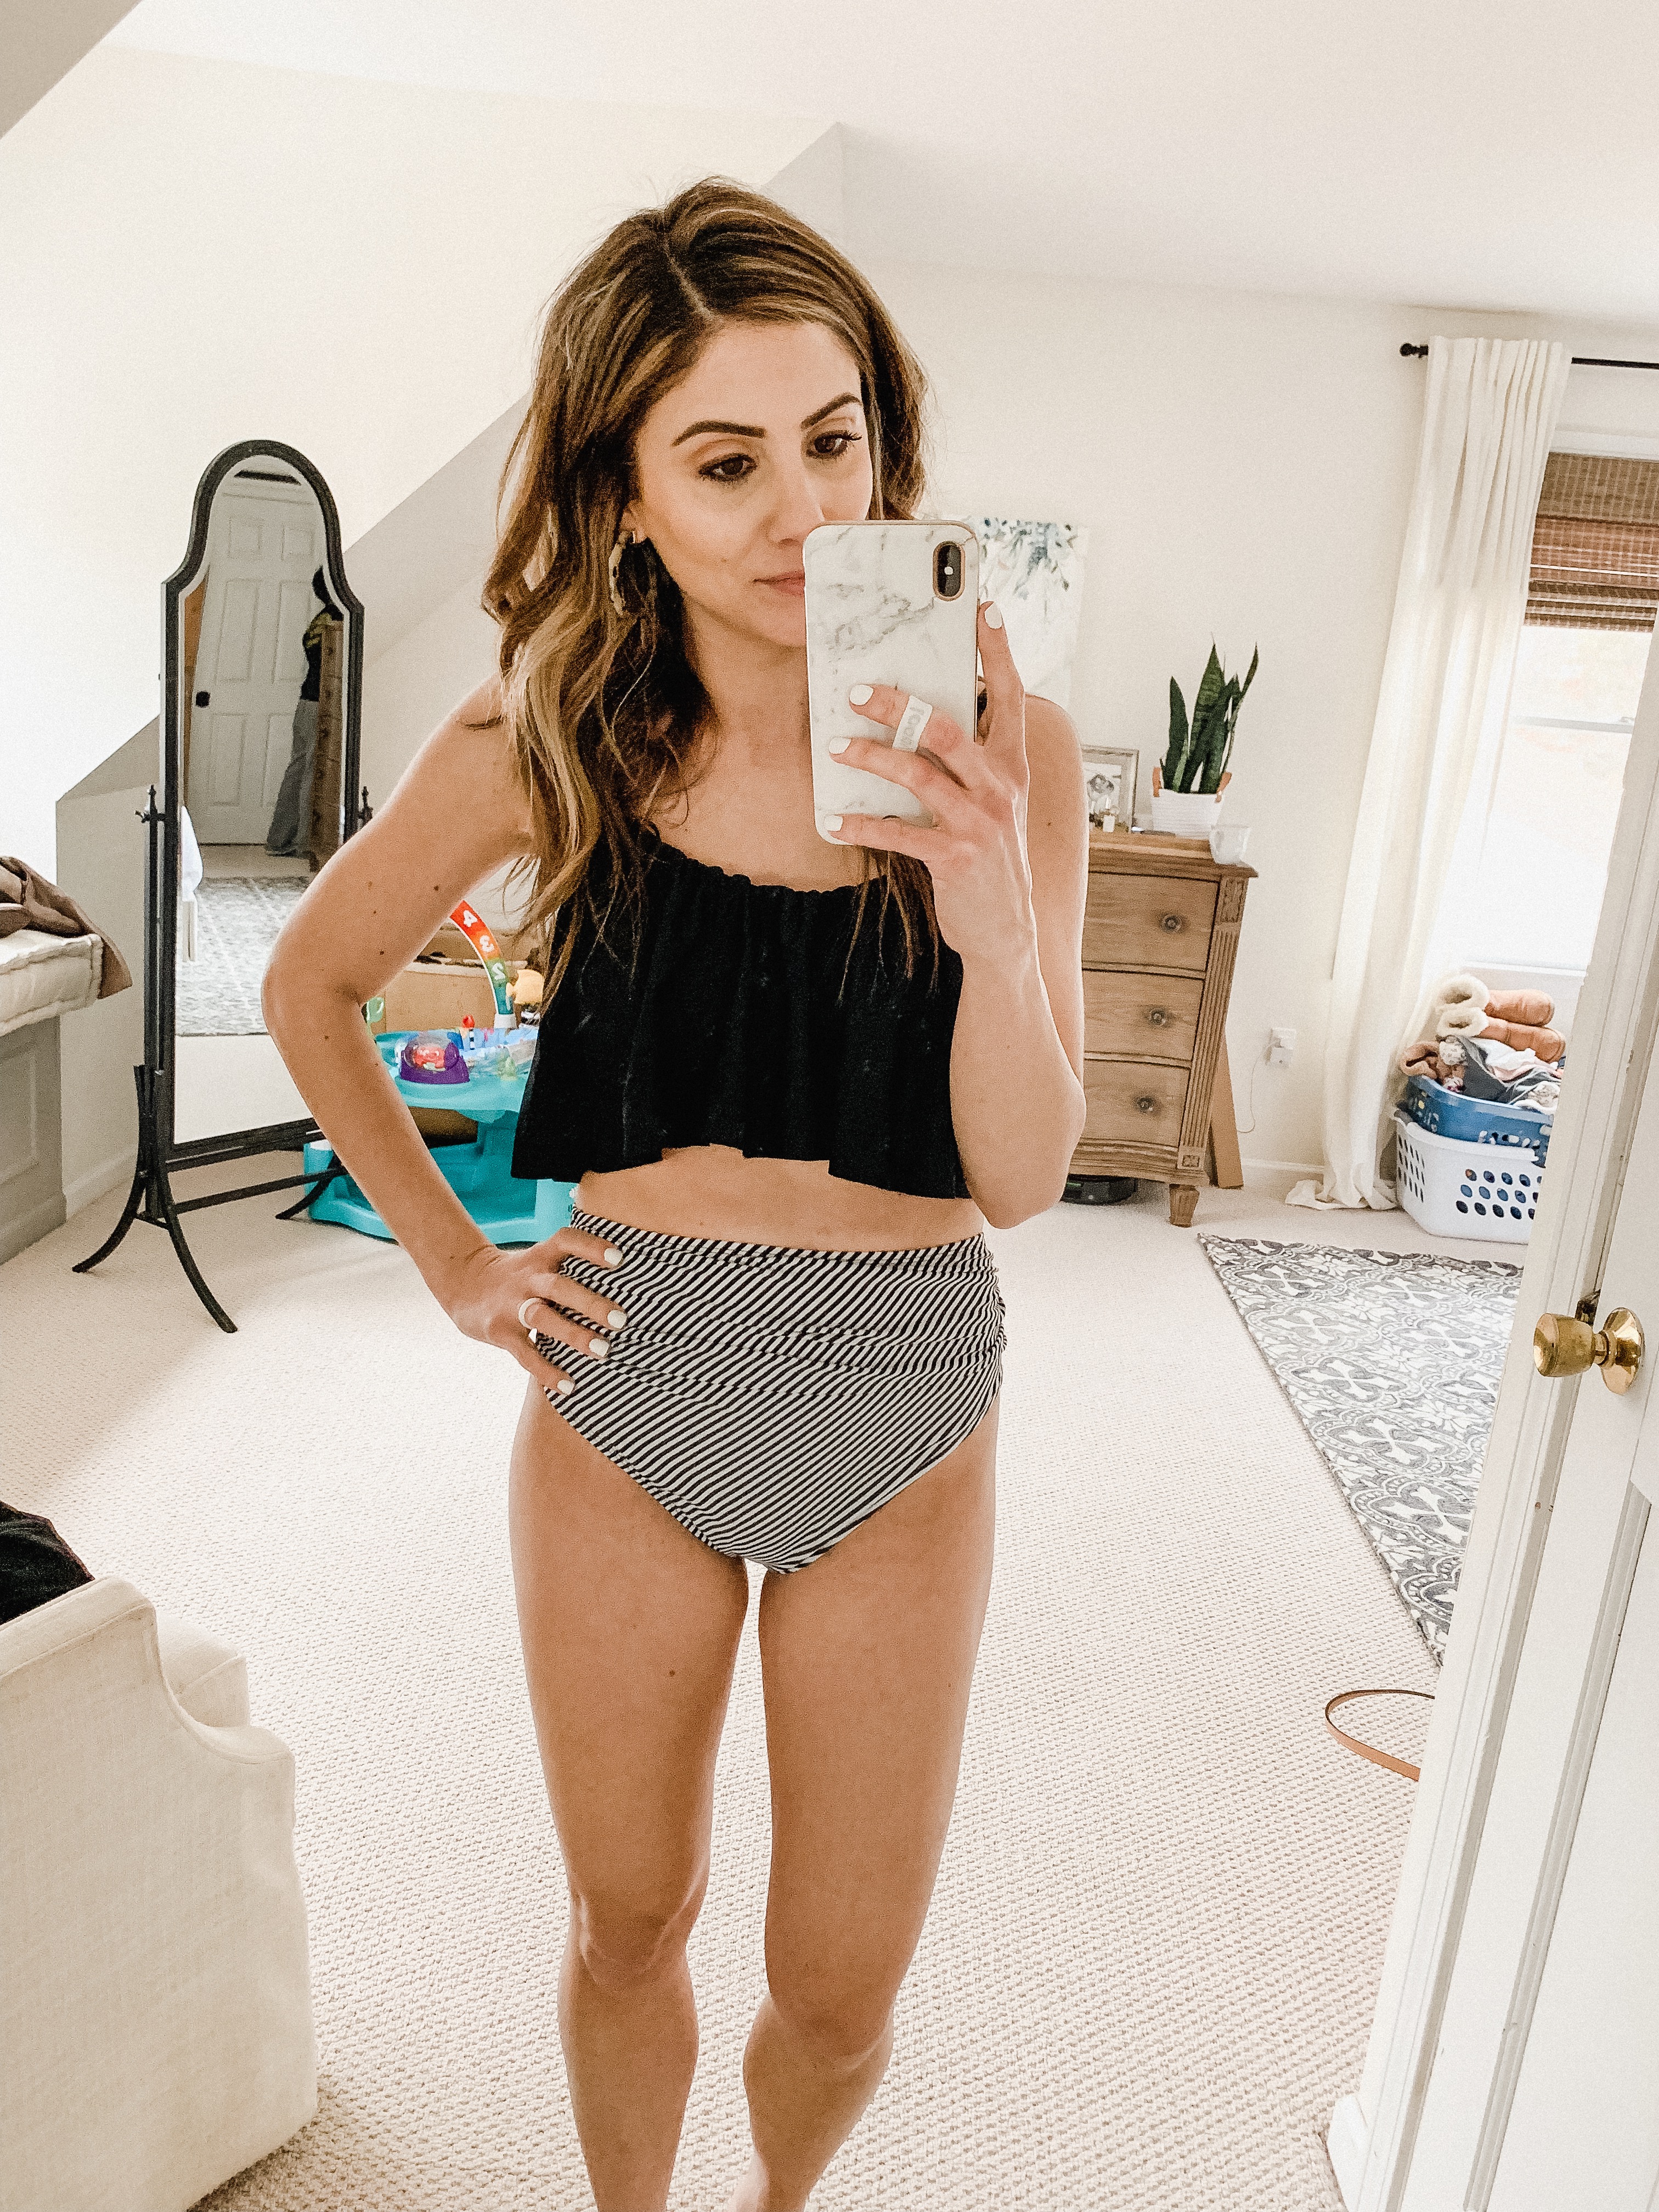 Connecticut life and style blogger Lauren McBride shares The Best Modest Swimwear, featuring a variety of bathing suit that provide modest coverage.